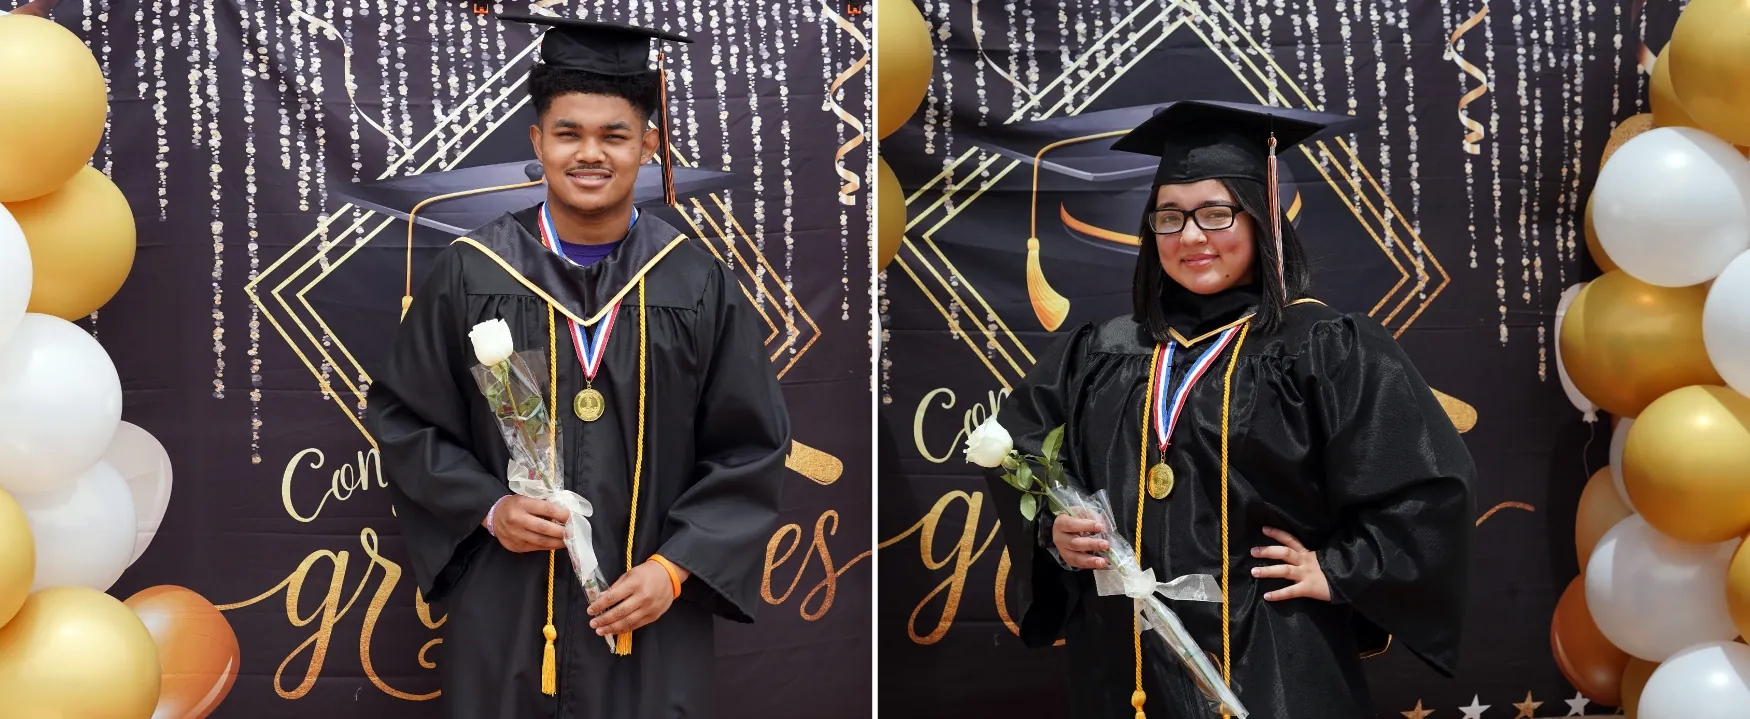 Two college graduates in caps and gowns smile with satisfaction as each holds a single white rose.